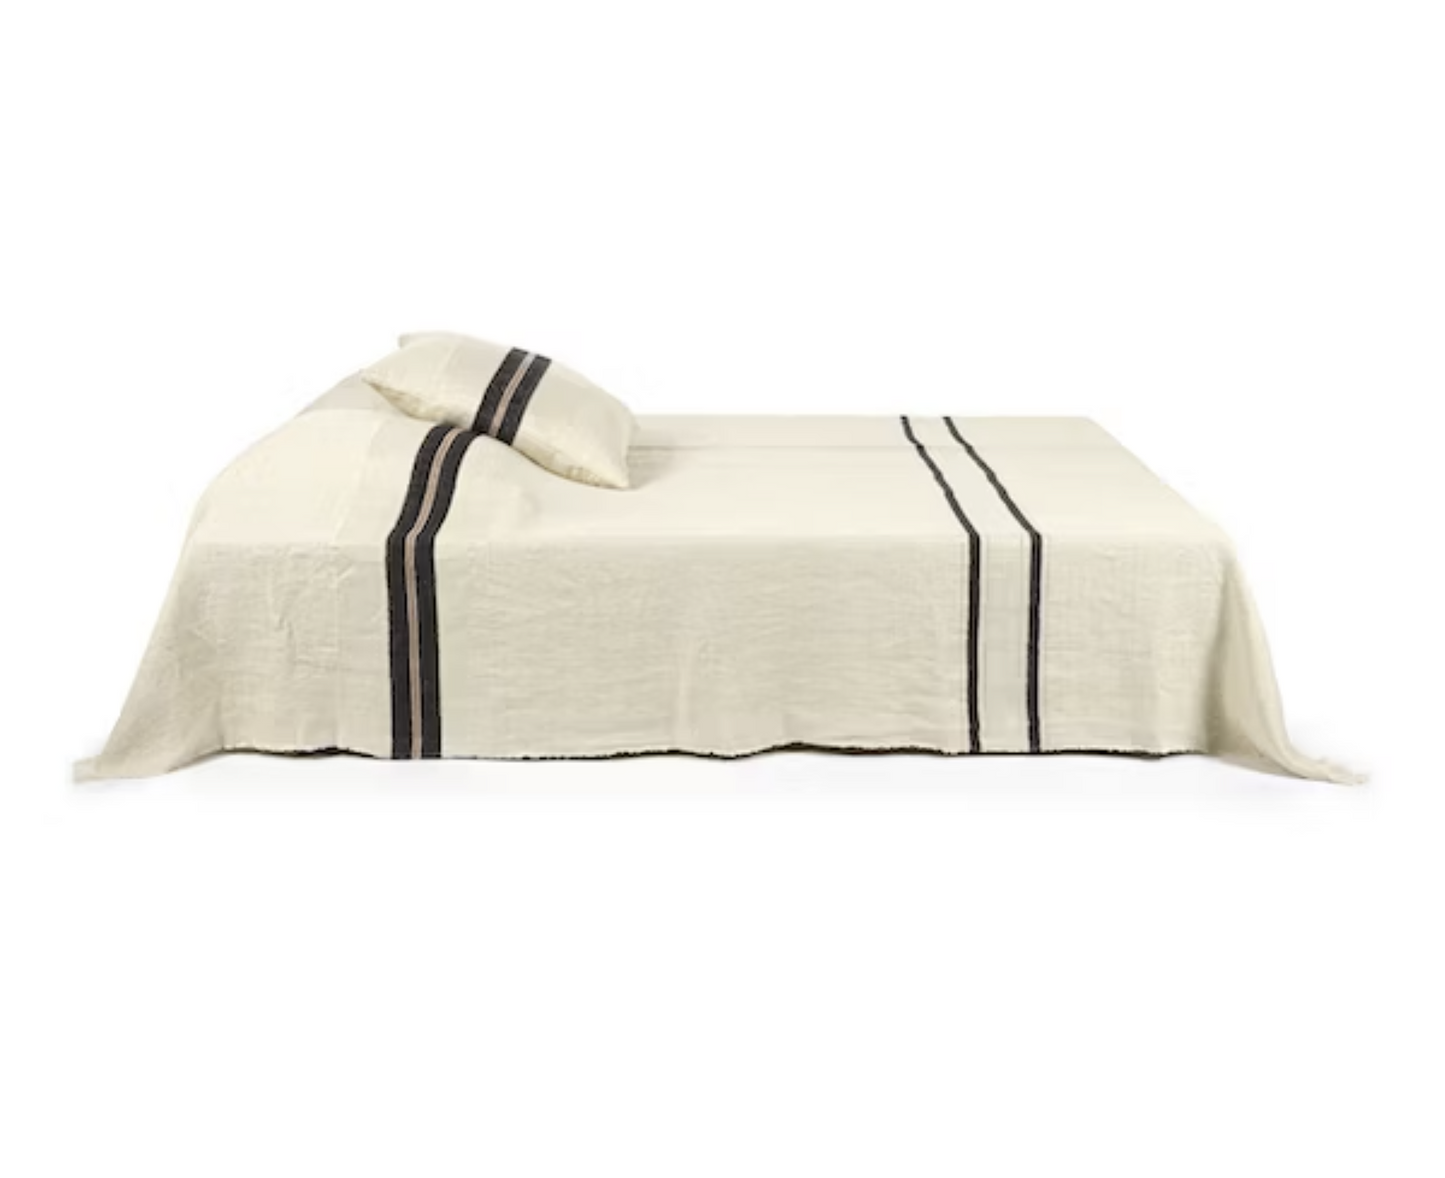 THE PATAGONIAN STRIPE COVERLET - Stripe $1,039.00